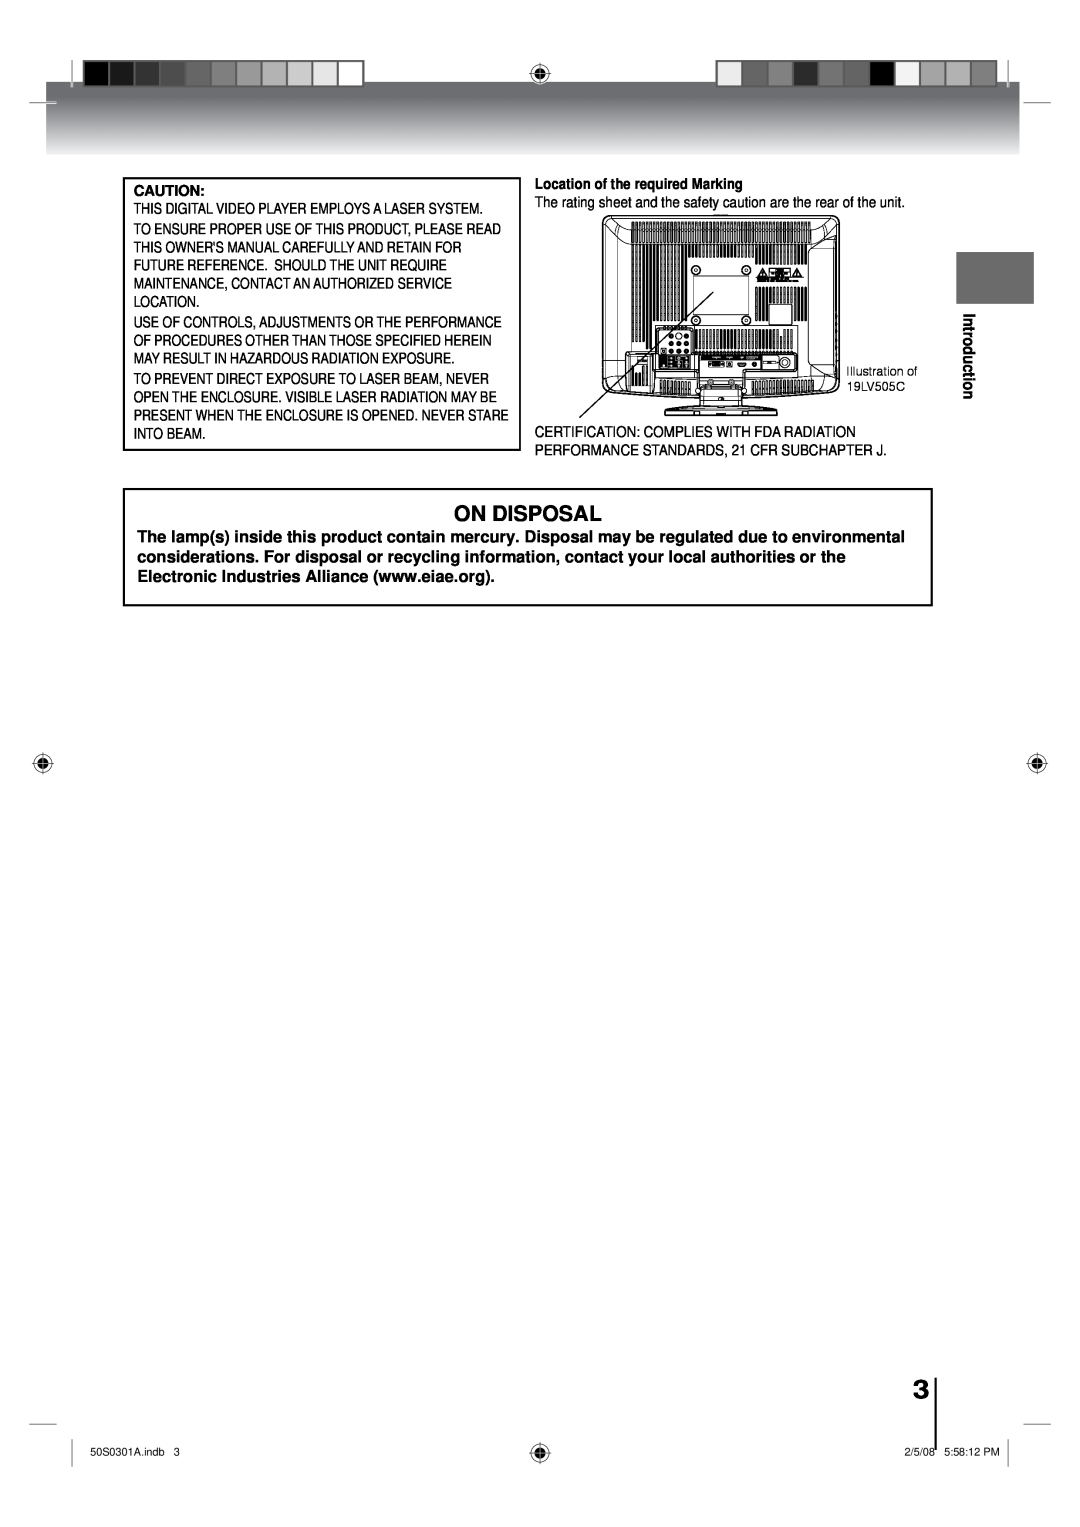 Toshiba 19LV505C, 22LV505C owner manual On Disposal, Location of the required Marking, Introduction 